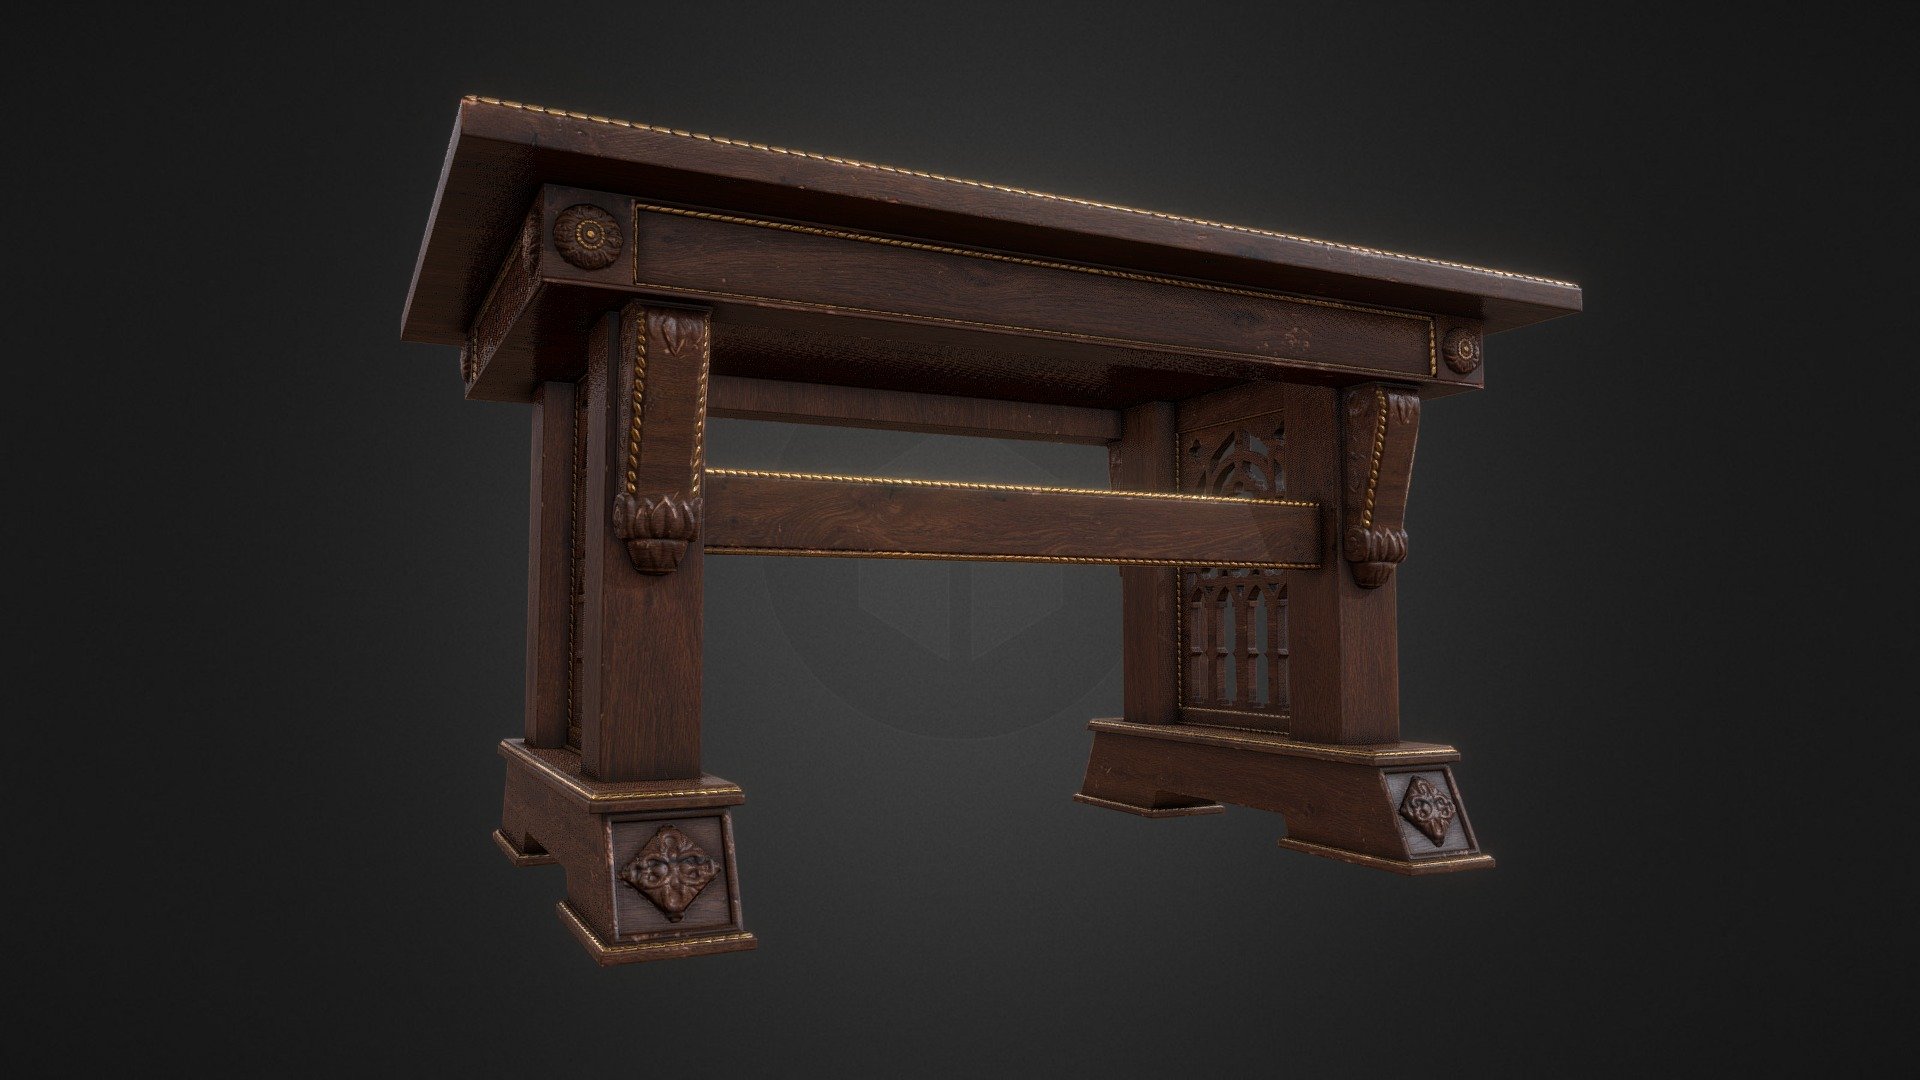 A sneak peek of upcoming props package I’m going to release for Unreal4 and Unity5  Please visit my sites: http://simviz.net  -link removed- - Gothic Desk - Buy Royalty Free 3D model by simviz.net (@simonscat) 3d model